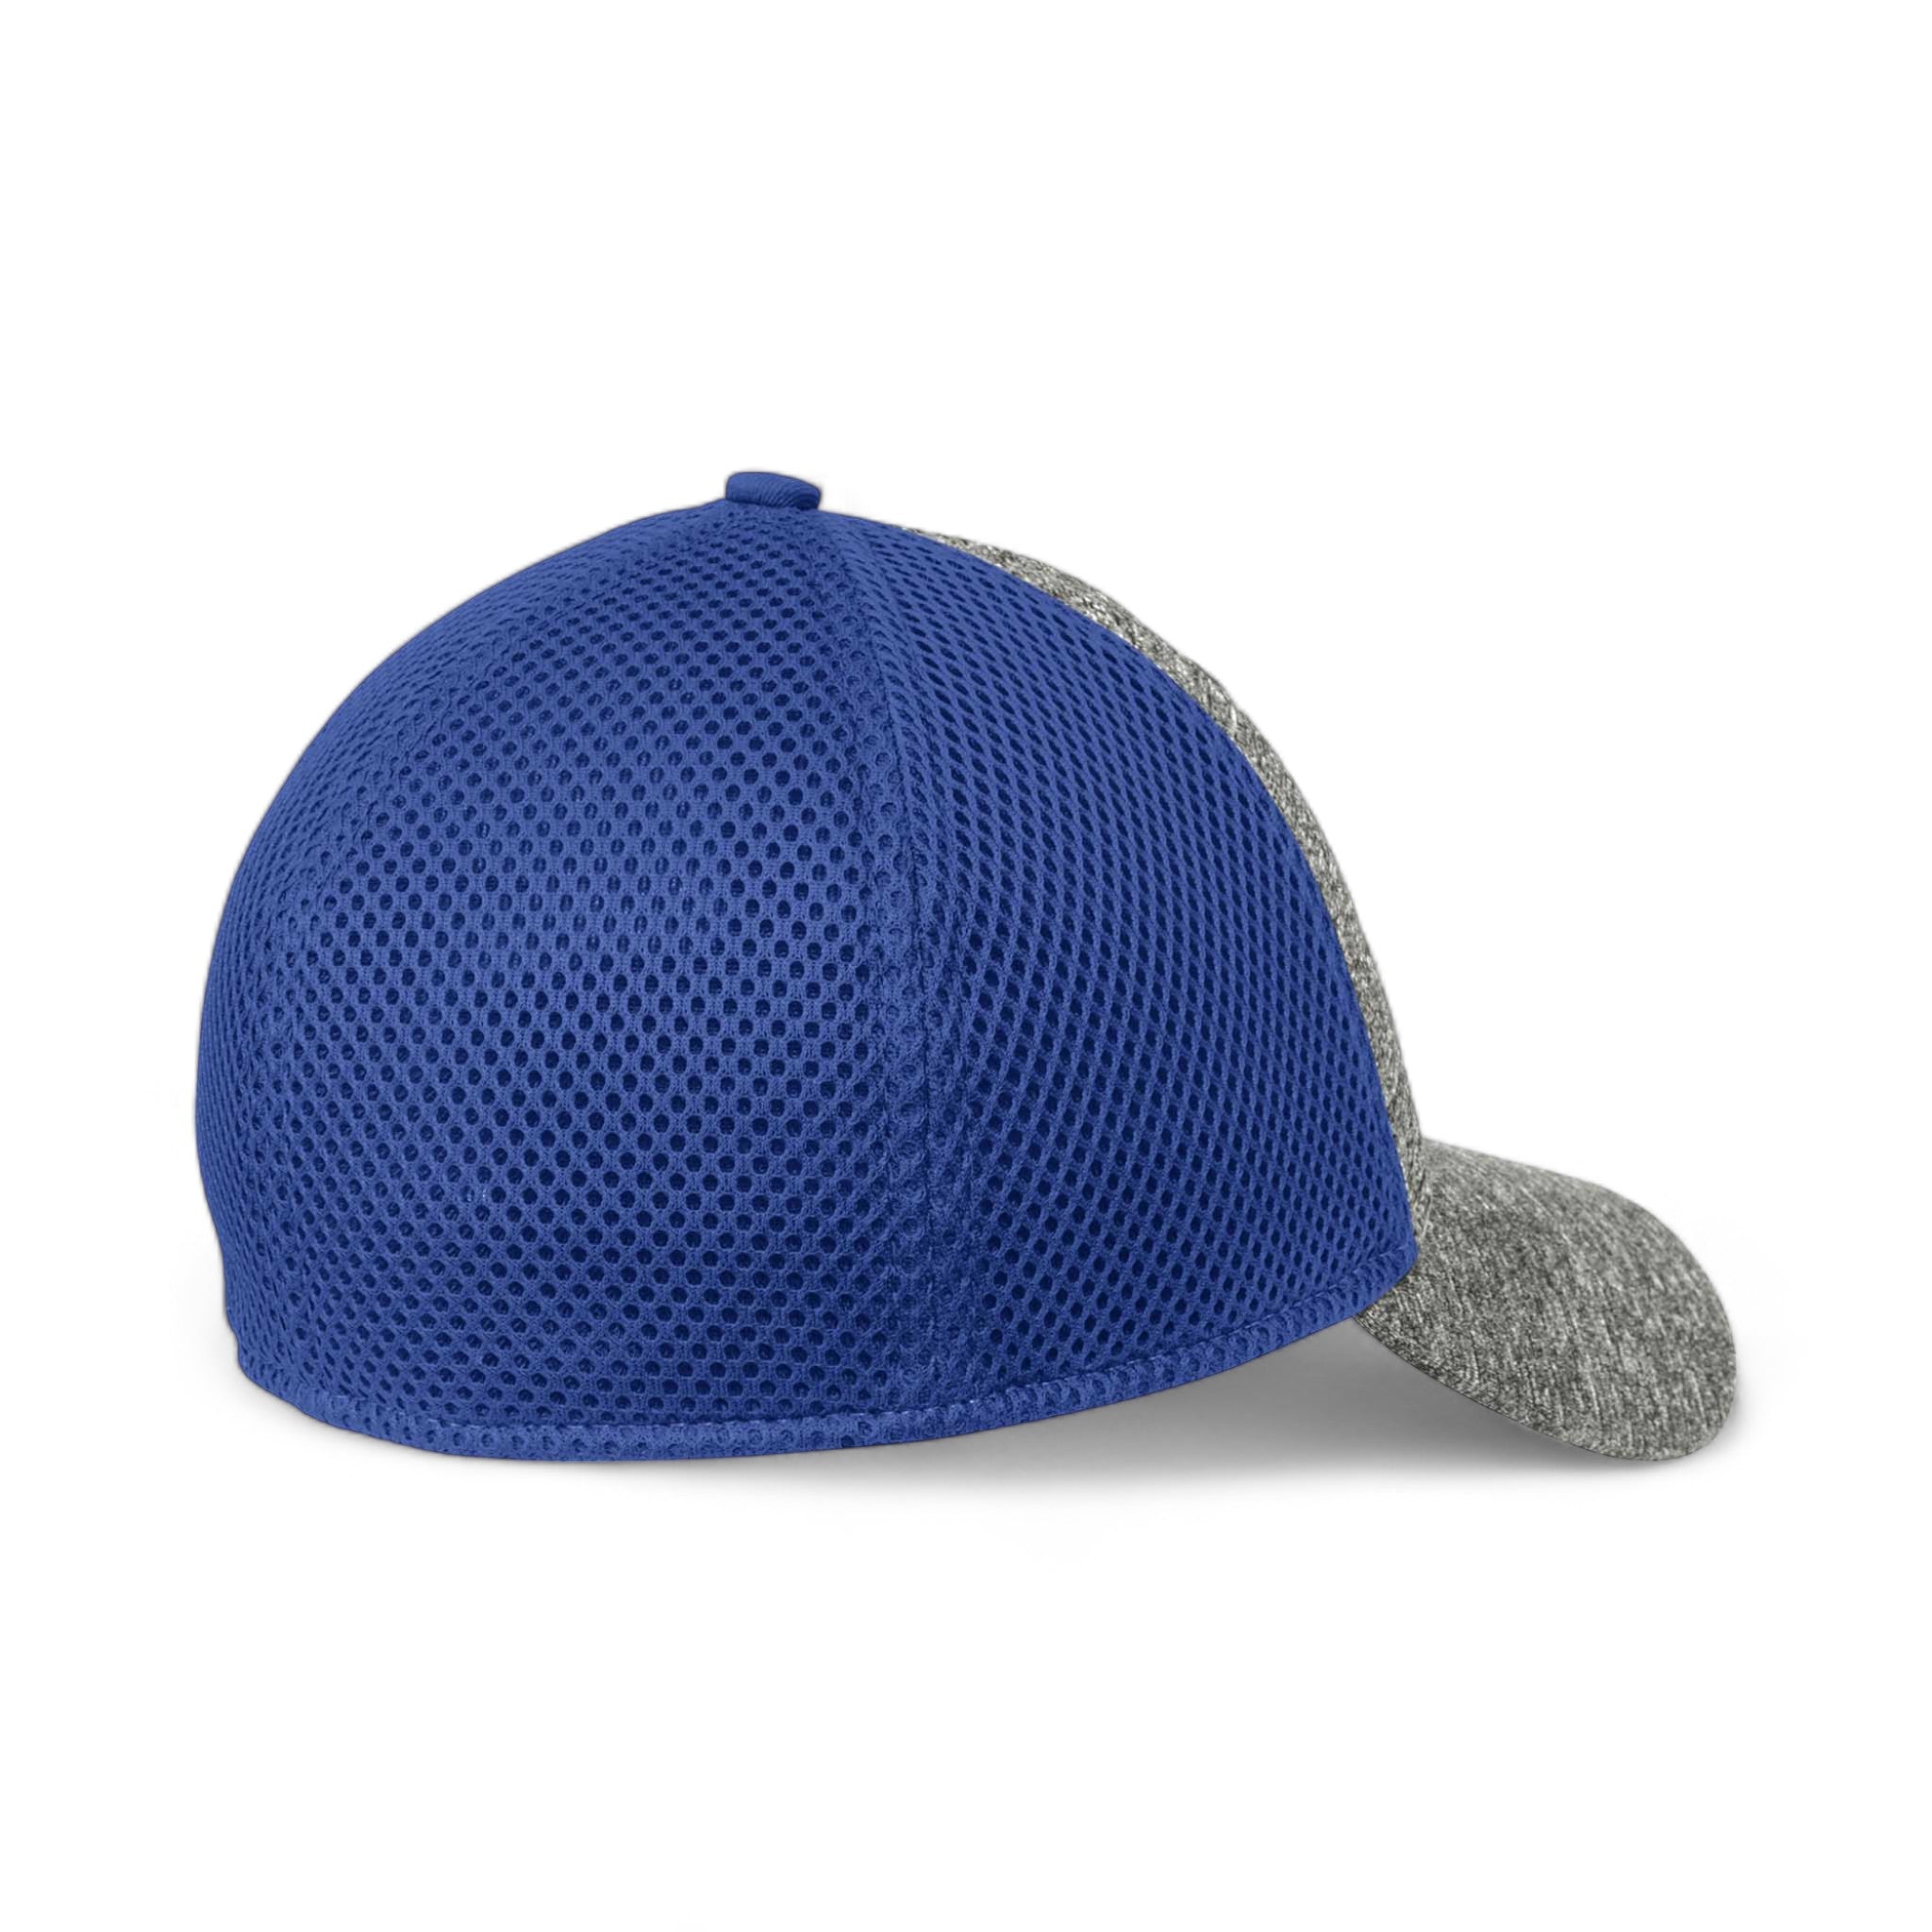 Back view of New Era NE702 custom hat in royal and shadow heather